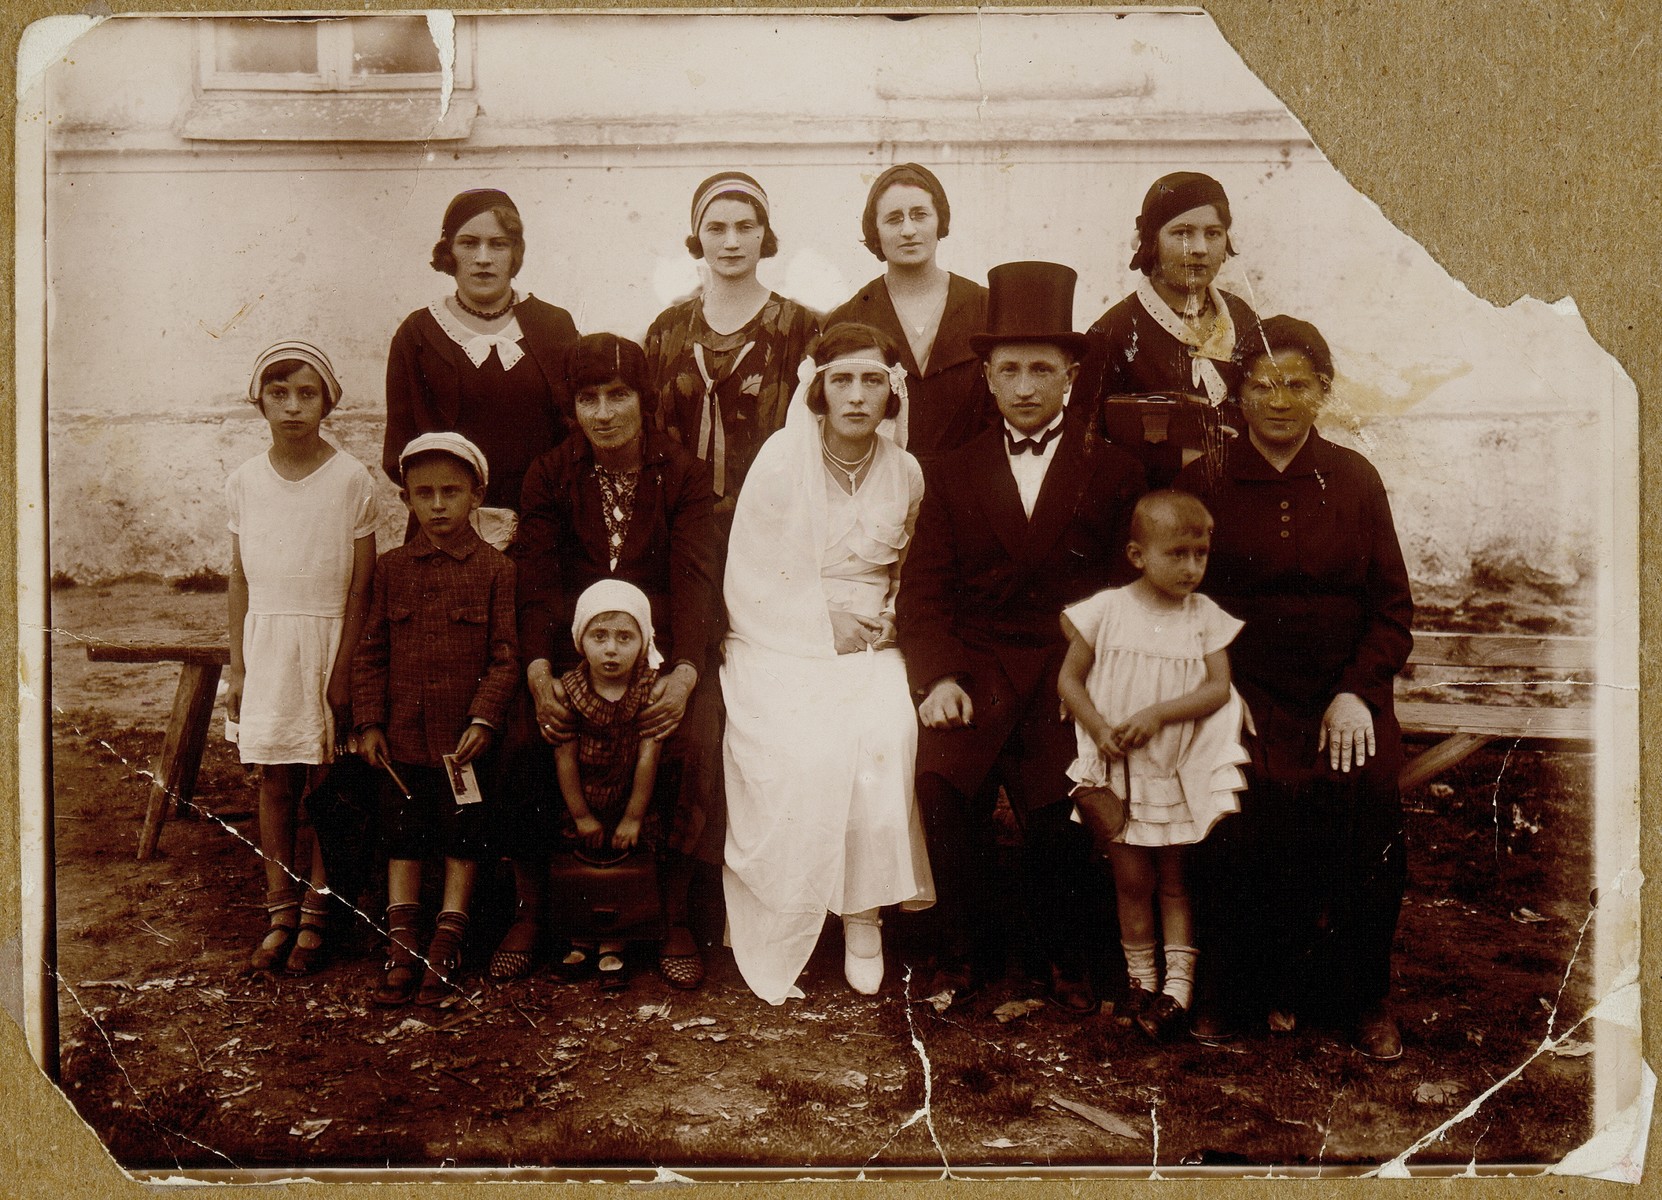 The wedding of Bat-Sheva Rozowski and Rabbi David Zalmanovitz from Ilya.  

Bat-Sheva was the daughter of Rabbi Szymen Rozowski.  This was the last wedding celebration in which the entire shtetl participated, as in pre-World War I days.  Sitting next to Bat-Sheva in the shulhoyf is her mother, Rebbetzin Miriam; next to the groom is his mother, Dvorah.  Standing behind them are Bat-Sheva's brother's wife and David's sisters.  In the front row are their little nephews and nieces.  They were all murdered during the Holocaust, the Rozowski family in the September 1941 massacre, Bat-Sheva, David, and their three children in Treblinka.